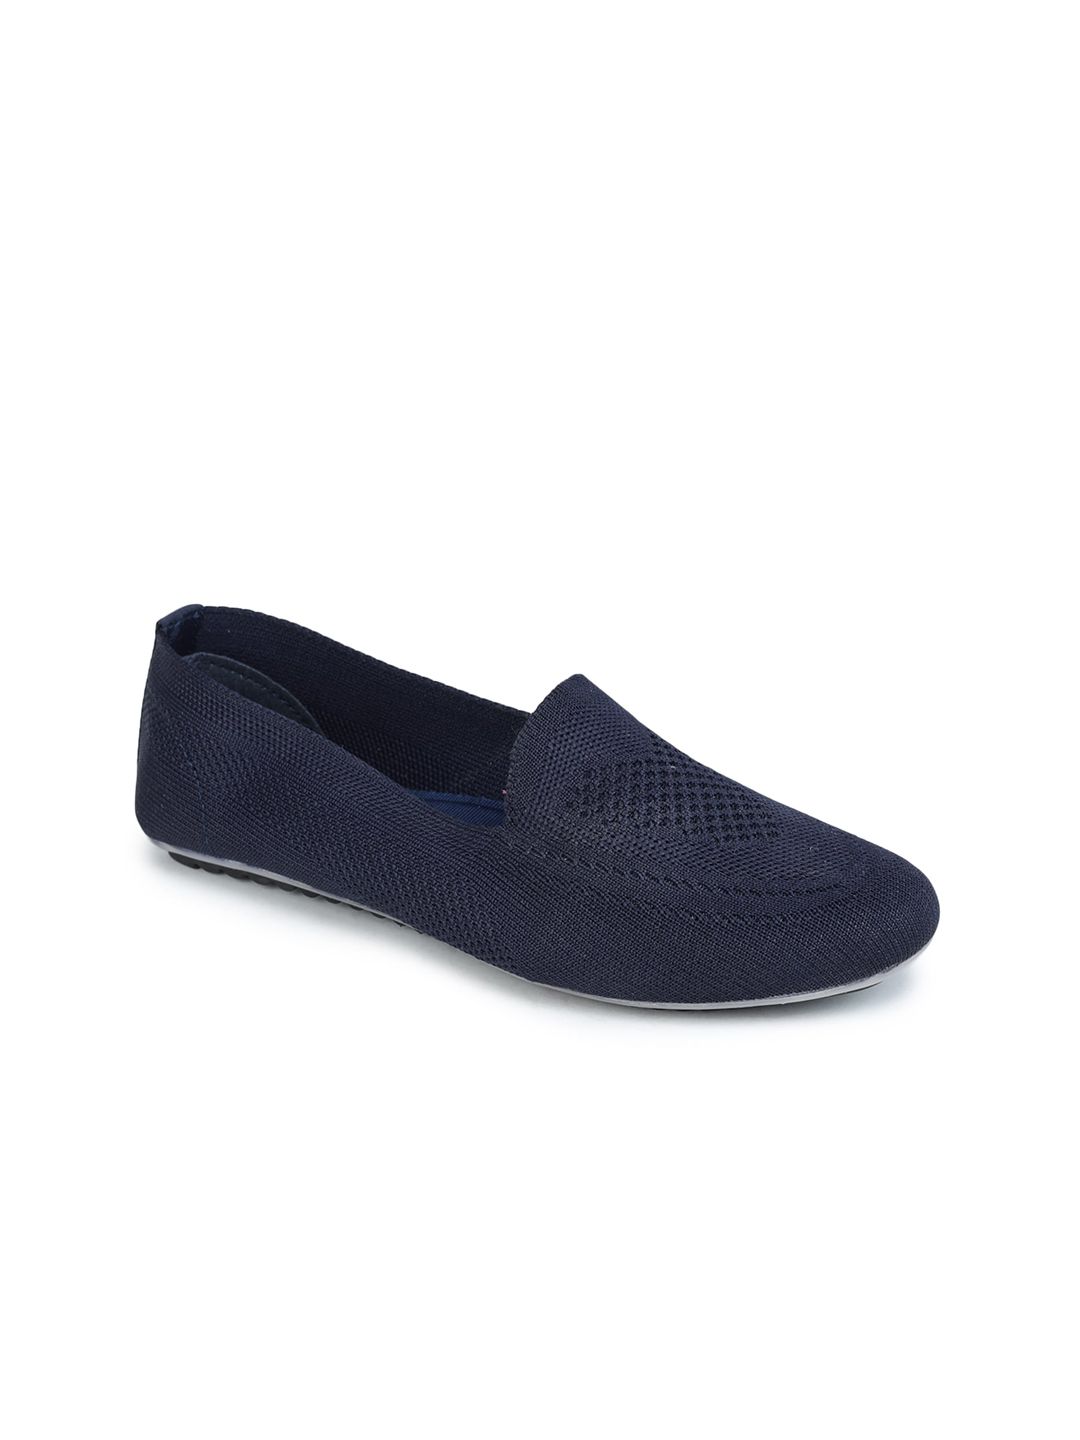 REFOAM Women Navy Blue Woven Design Loafers Price in India